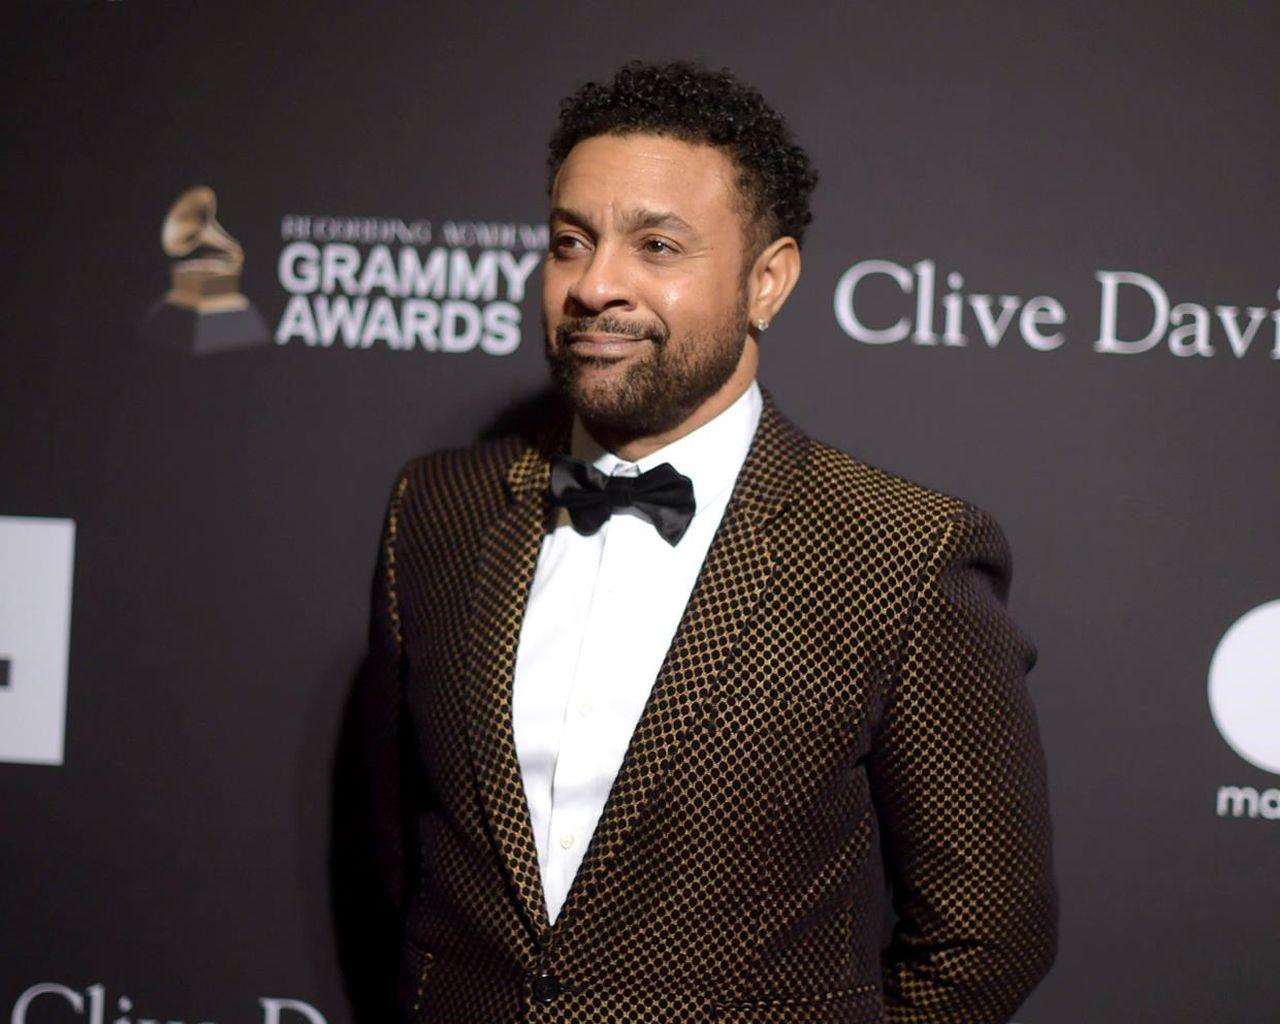 The Latest: Collaborators: No word from Glover on Grammys